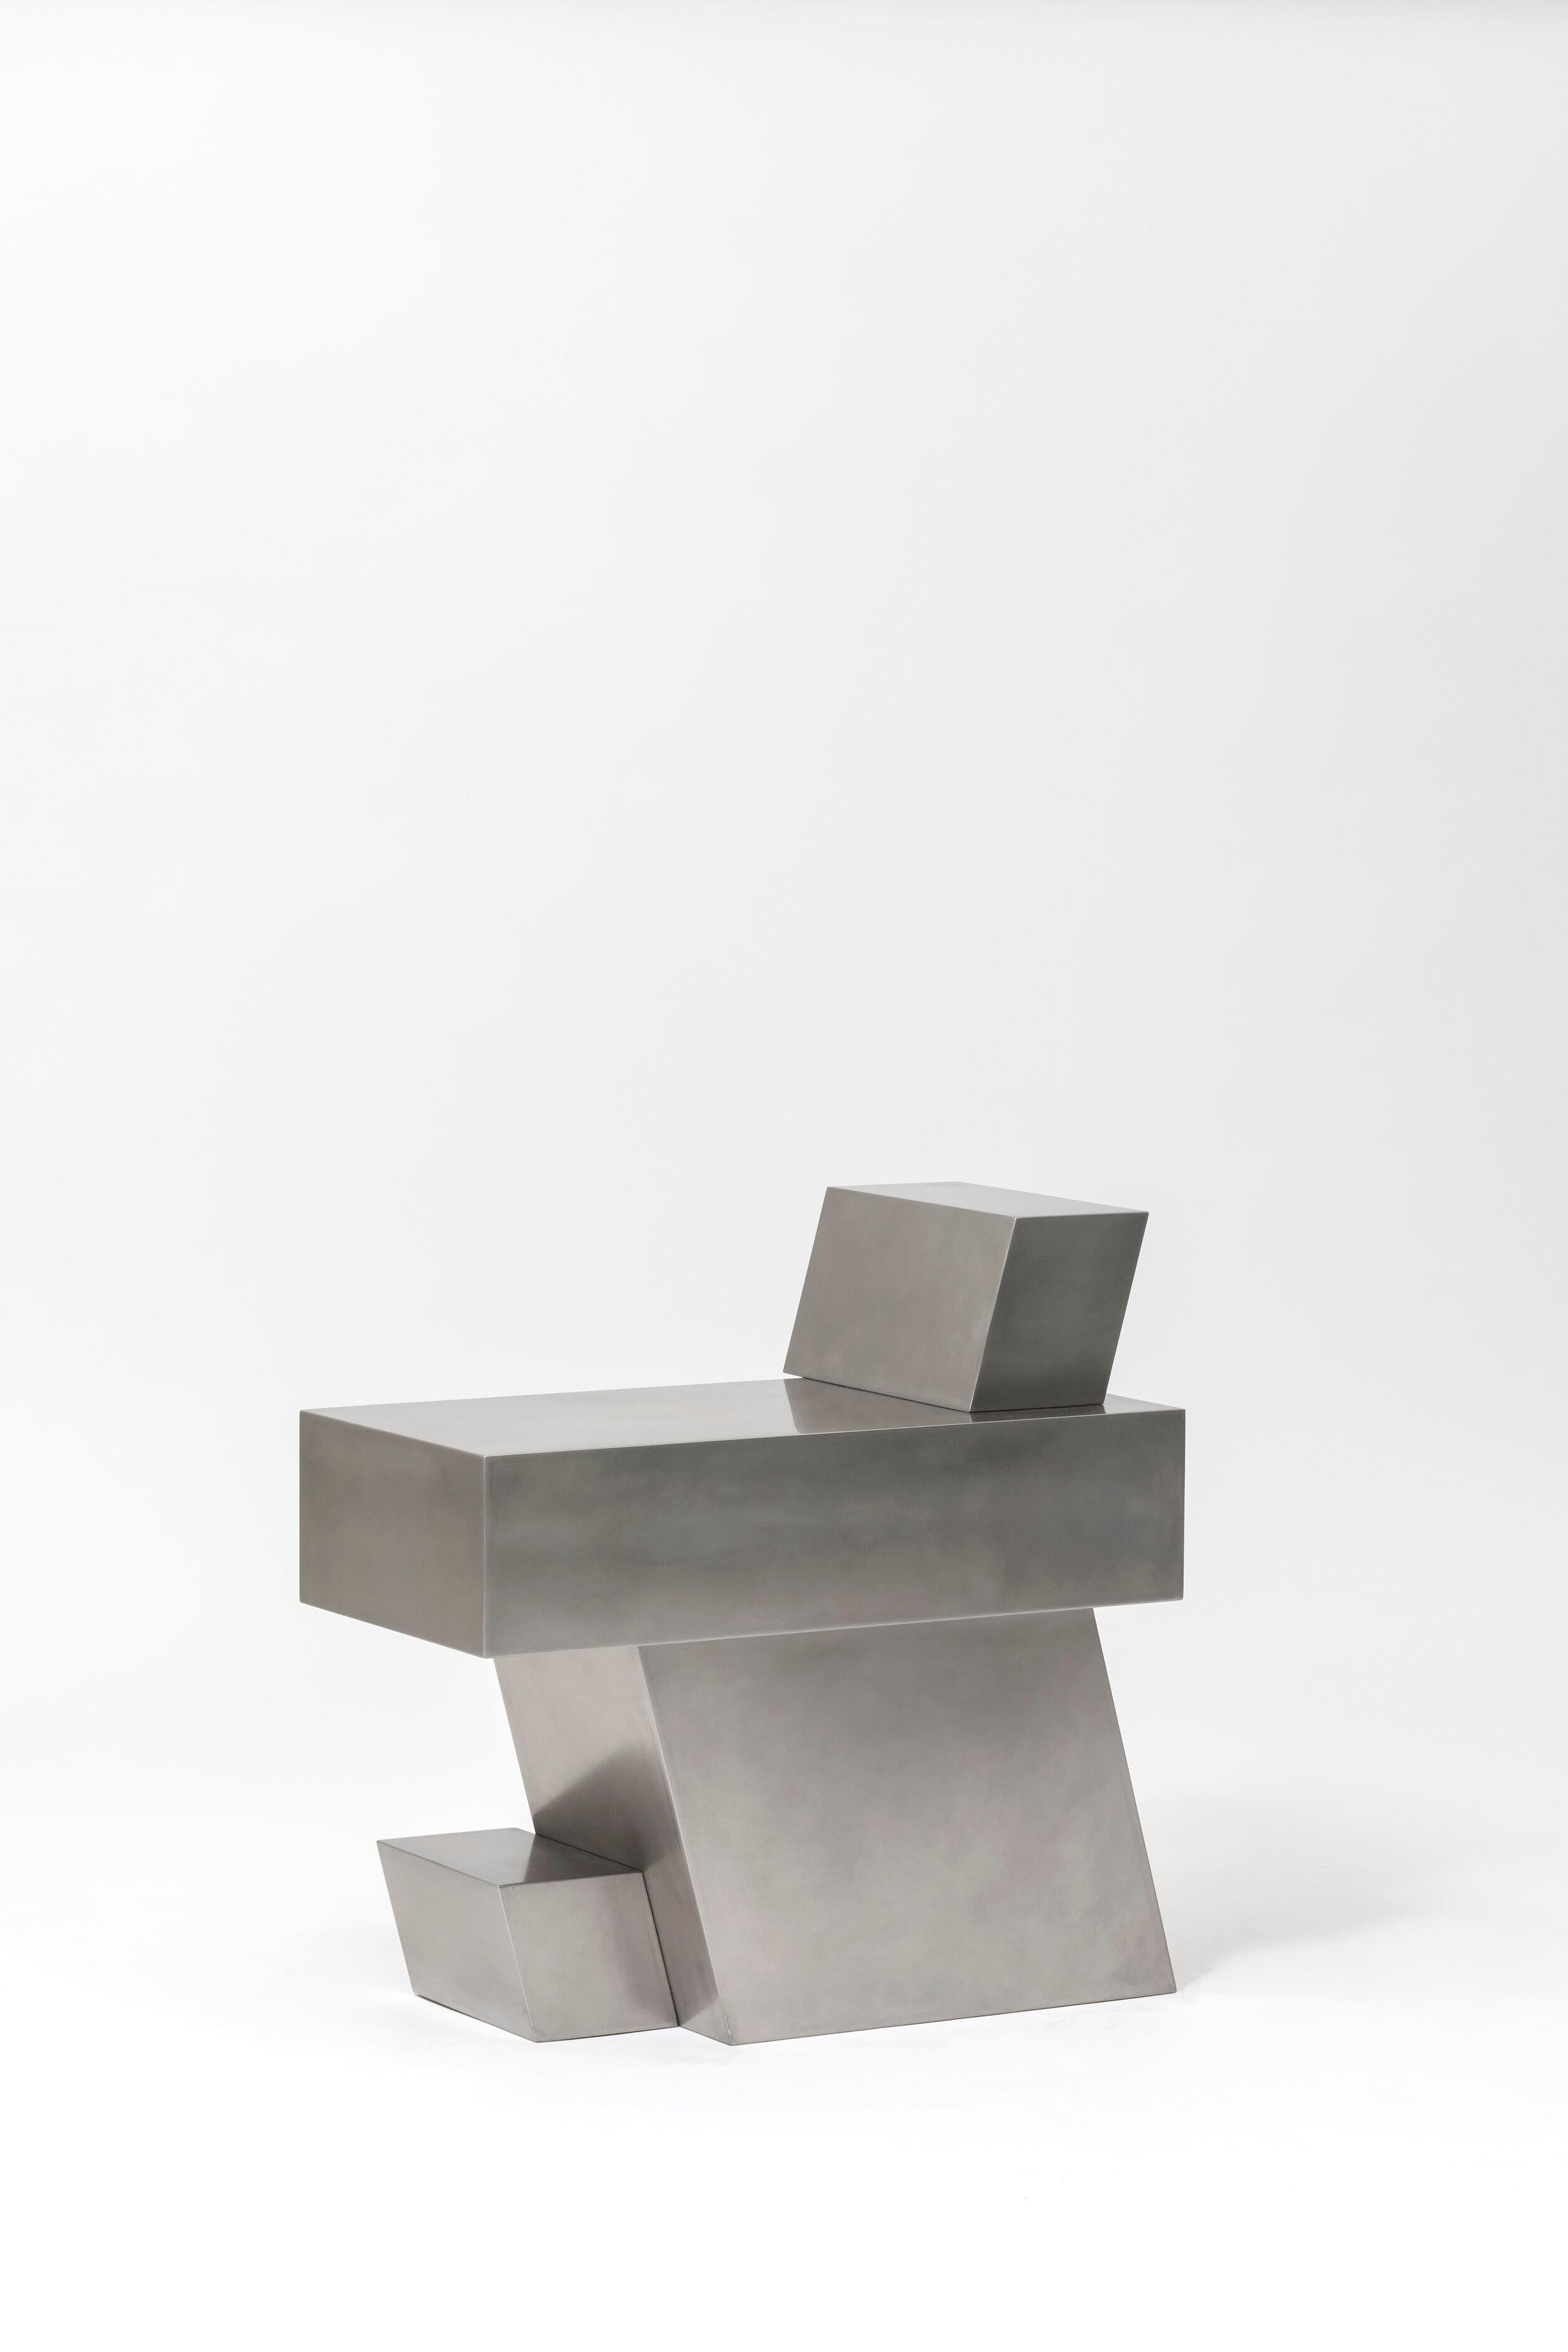 Layered steel seat XVI by Hyungshin Hwang
Dimensions: D 33 x W 54 x H 54 cm
Materials: stainless steel

Layered Series is the main theme and concept of work of Hwang, who continues his experiment which is based on architectural composition of